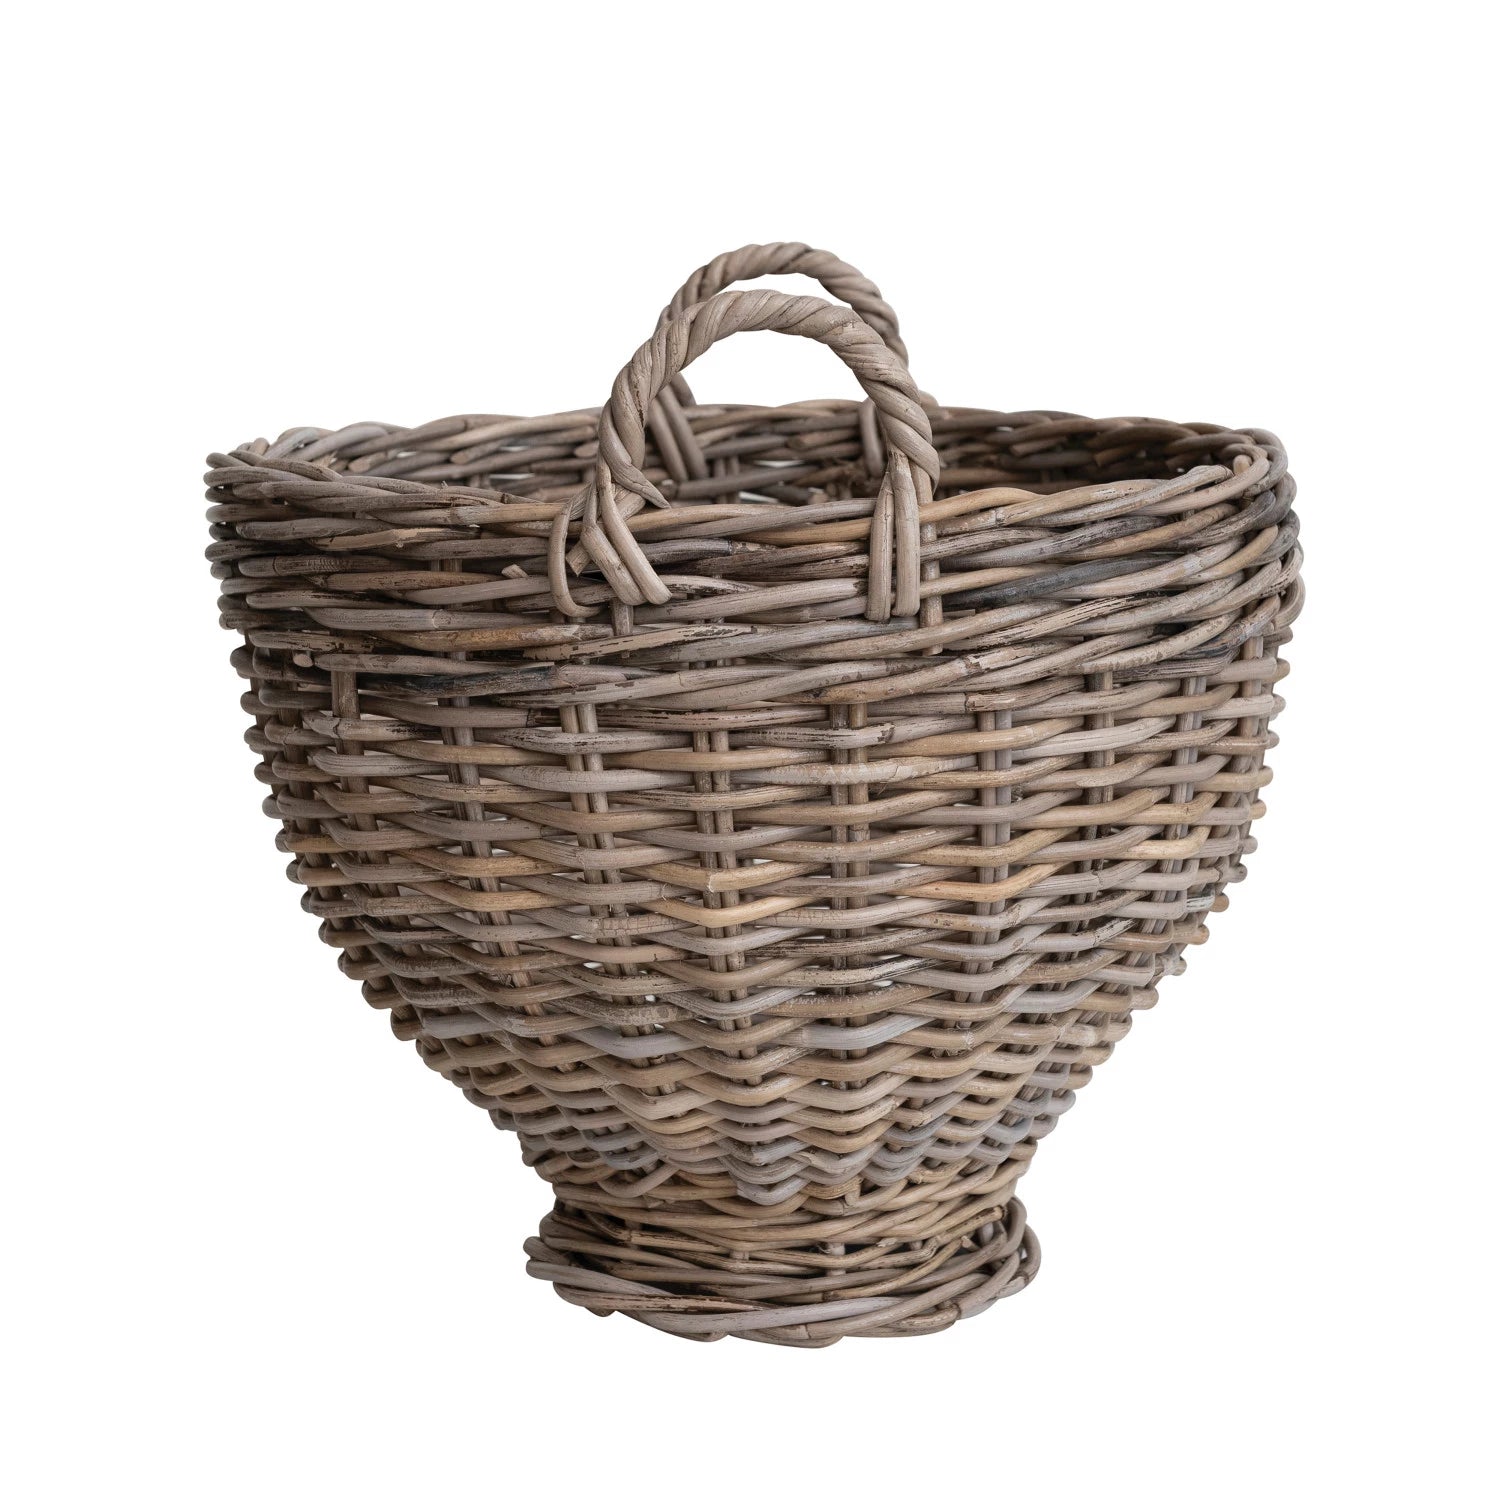 Hand-Woven Rattan Footed Basket w/ Handles, Natural